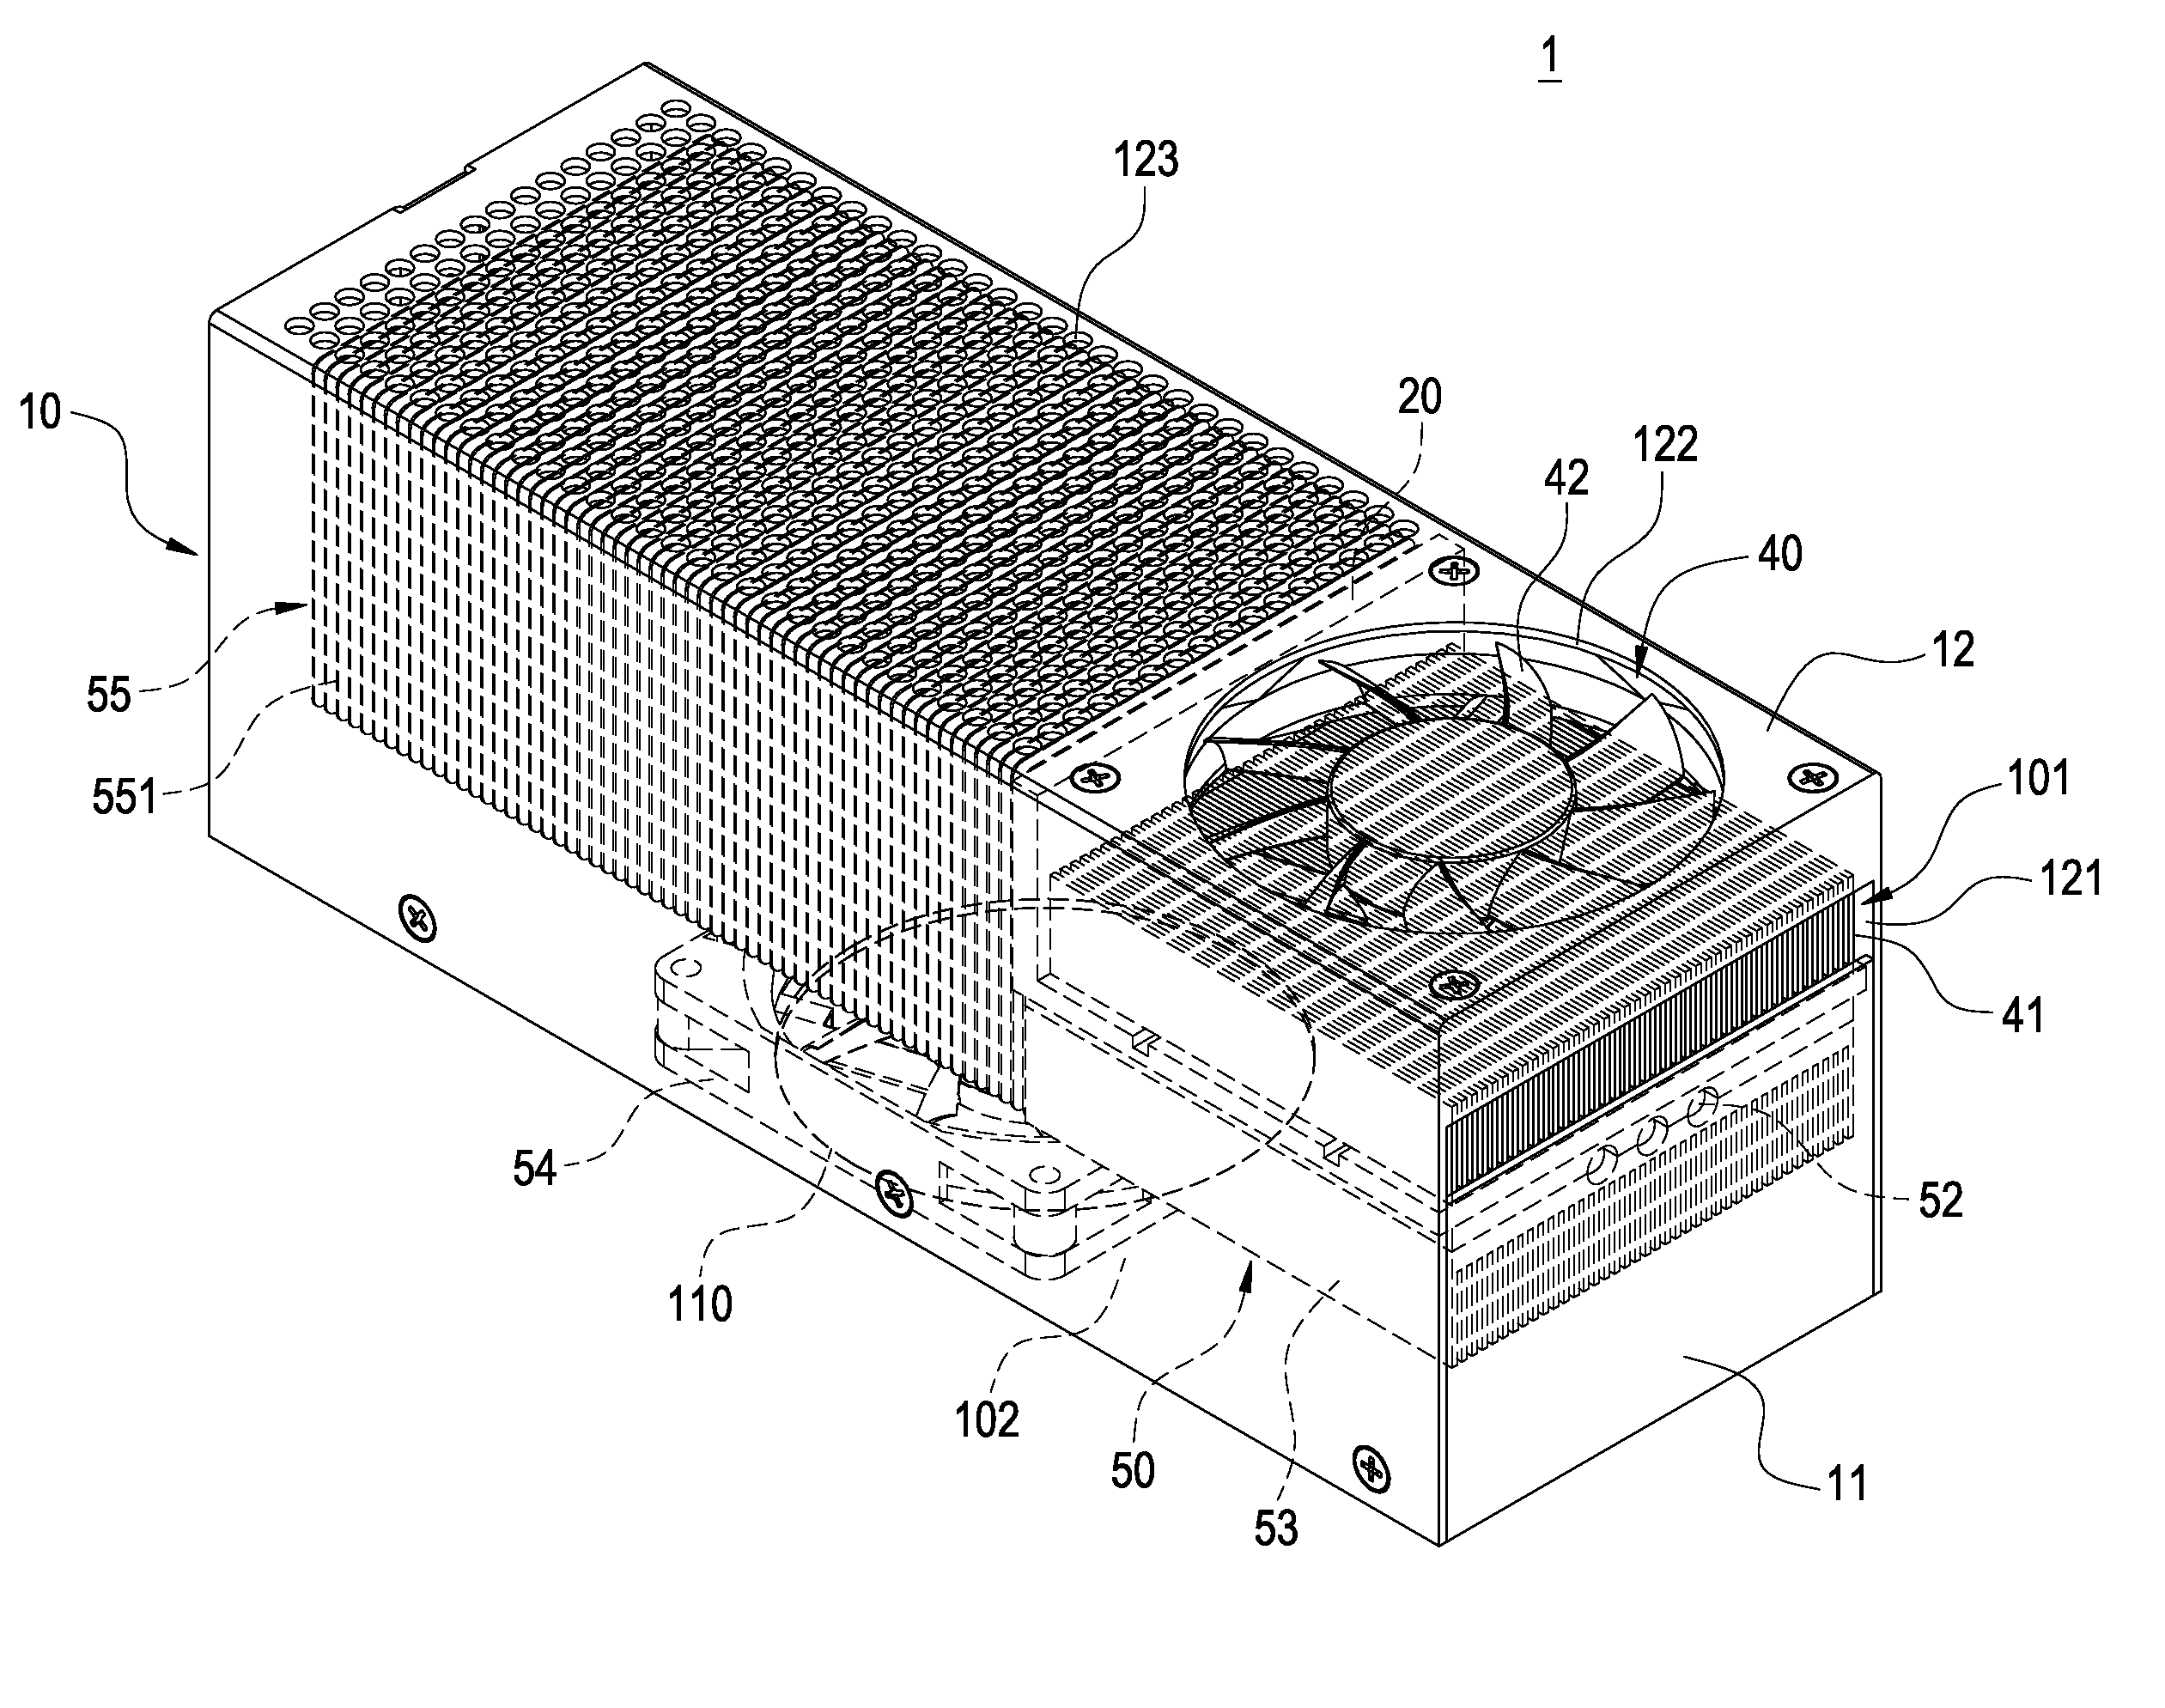 Heat-dissipating device for supplying cold airflow